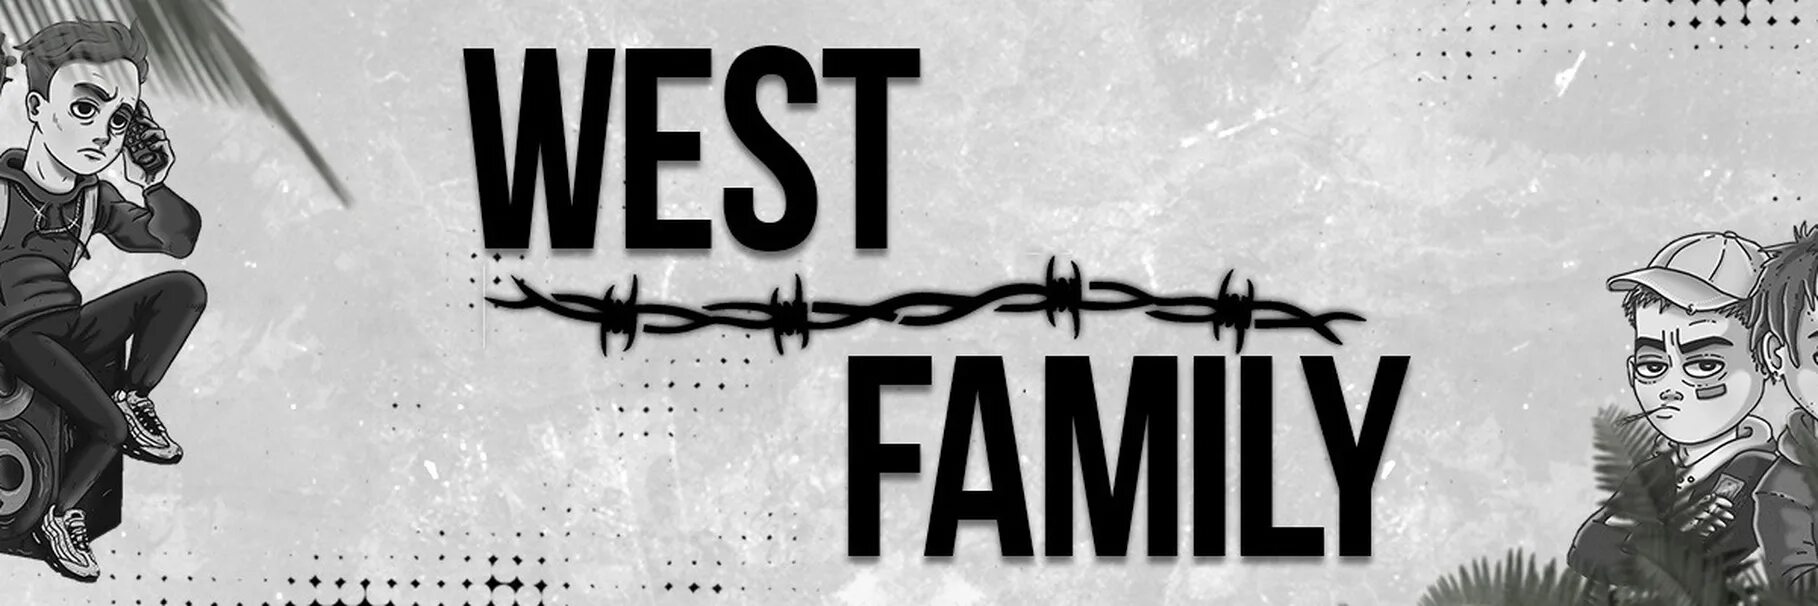 West family